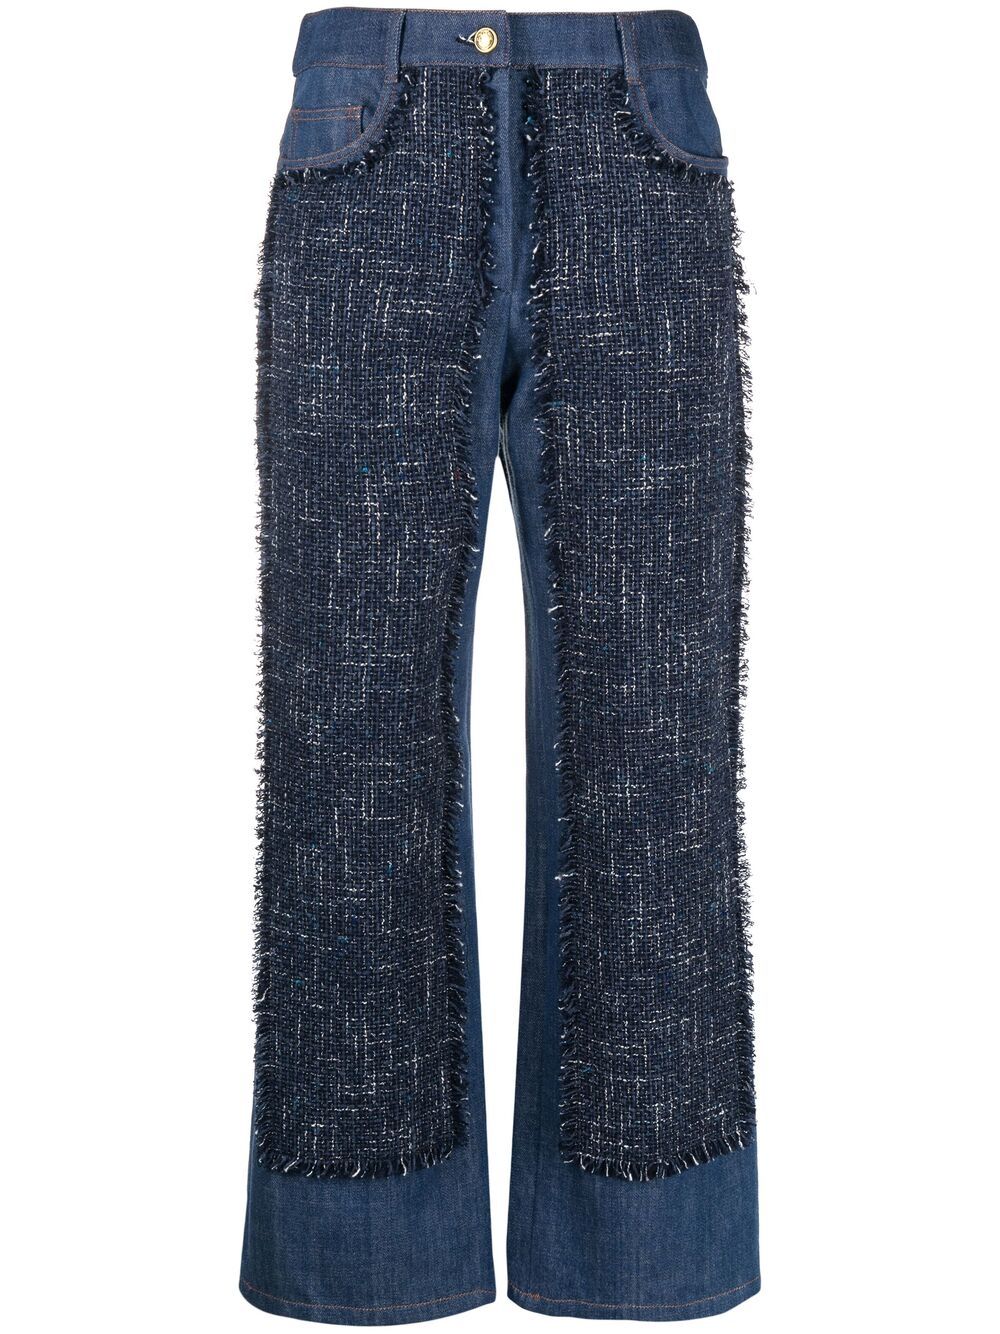 BOUTIQUE MOSCHINO WIDE-LEG CONTRAST JEANS